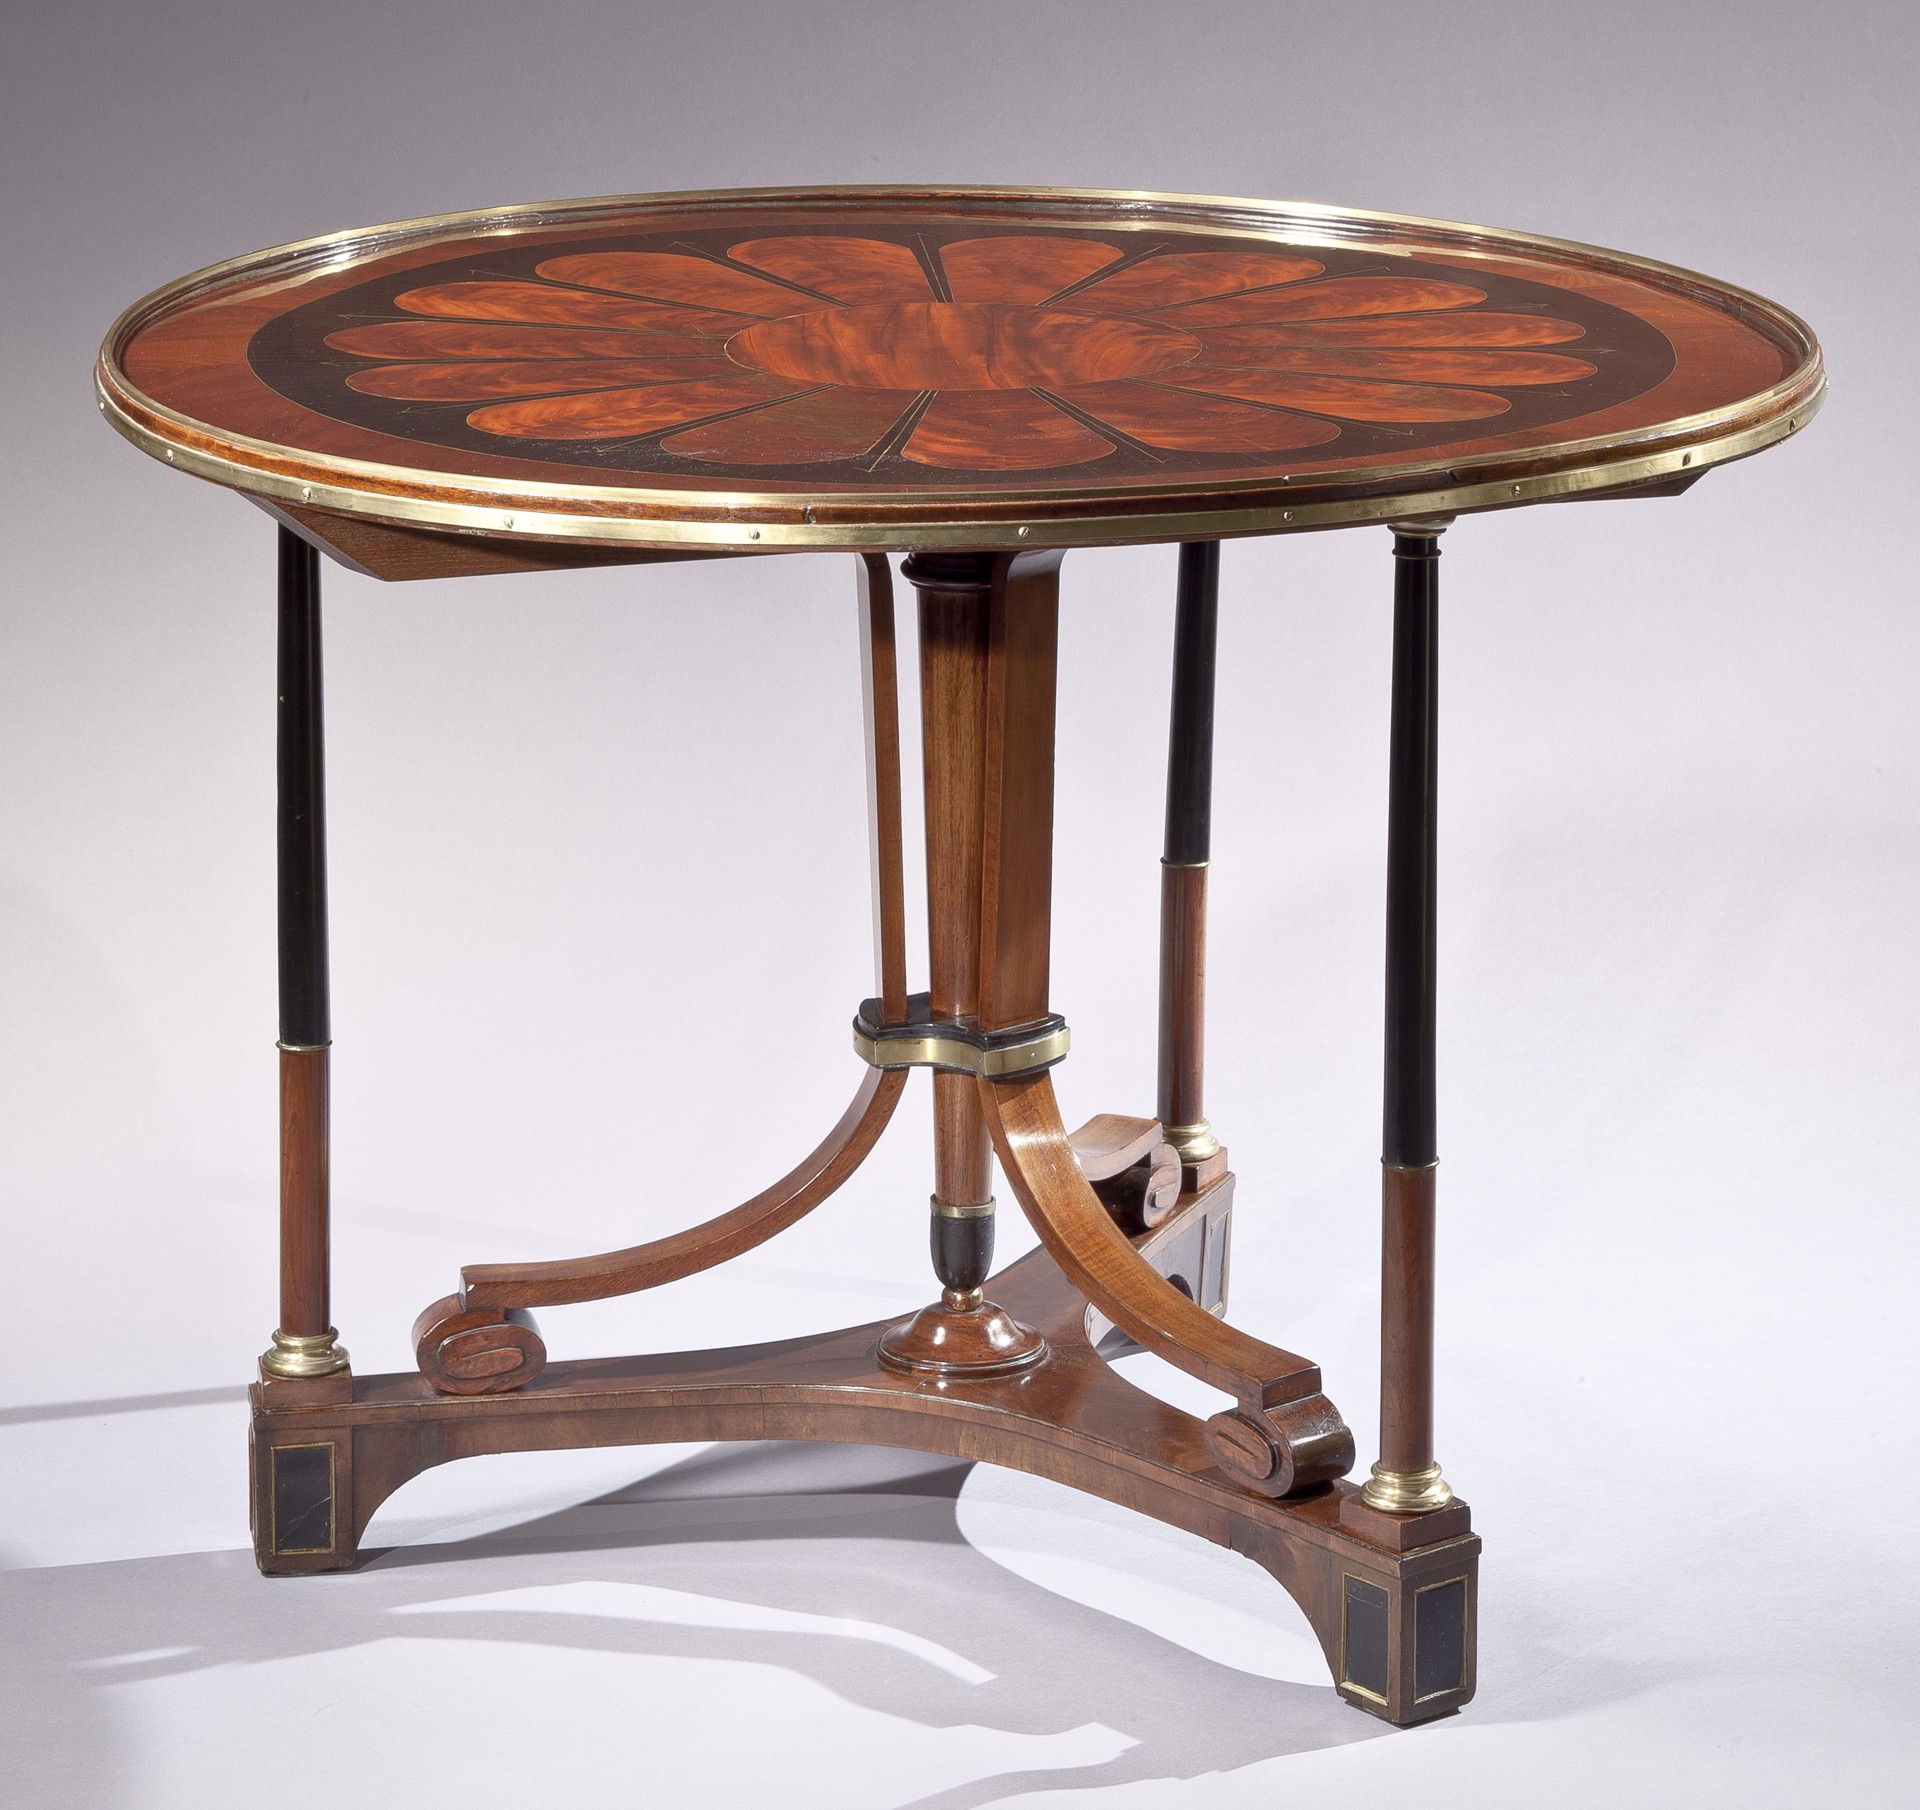 RUSSIAN NEOCLASSICAL STYLE BRASS-MOUNTED MAHOGANY AND EBONIZED CENTER TABLE 